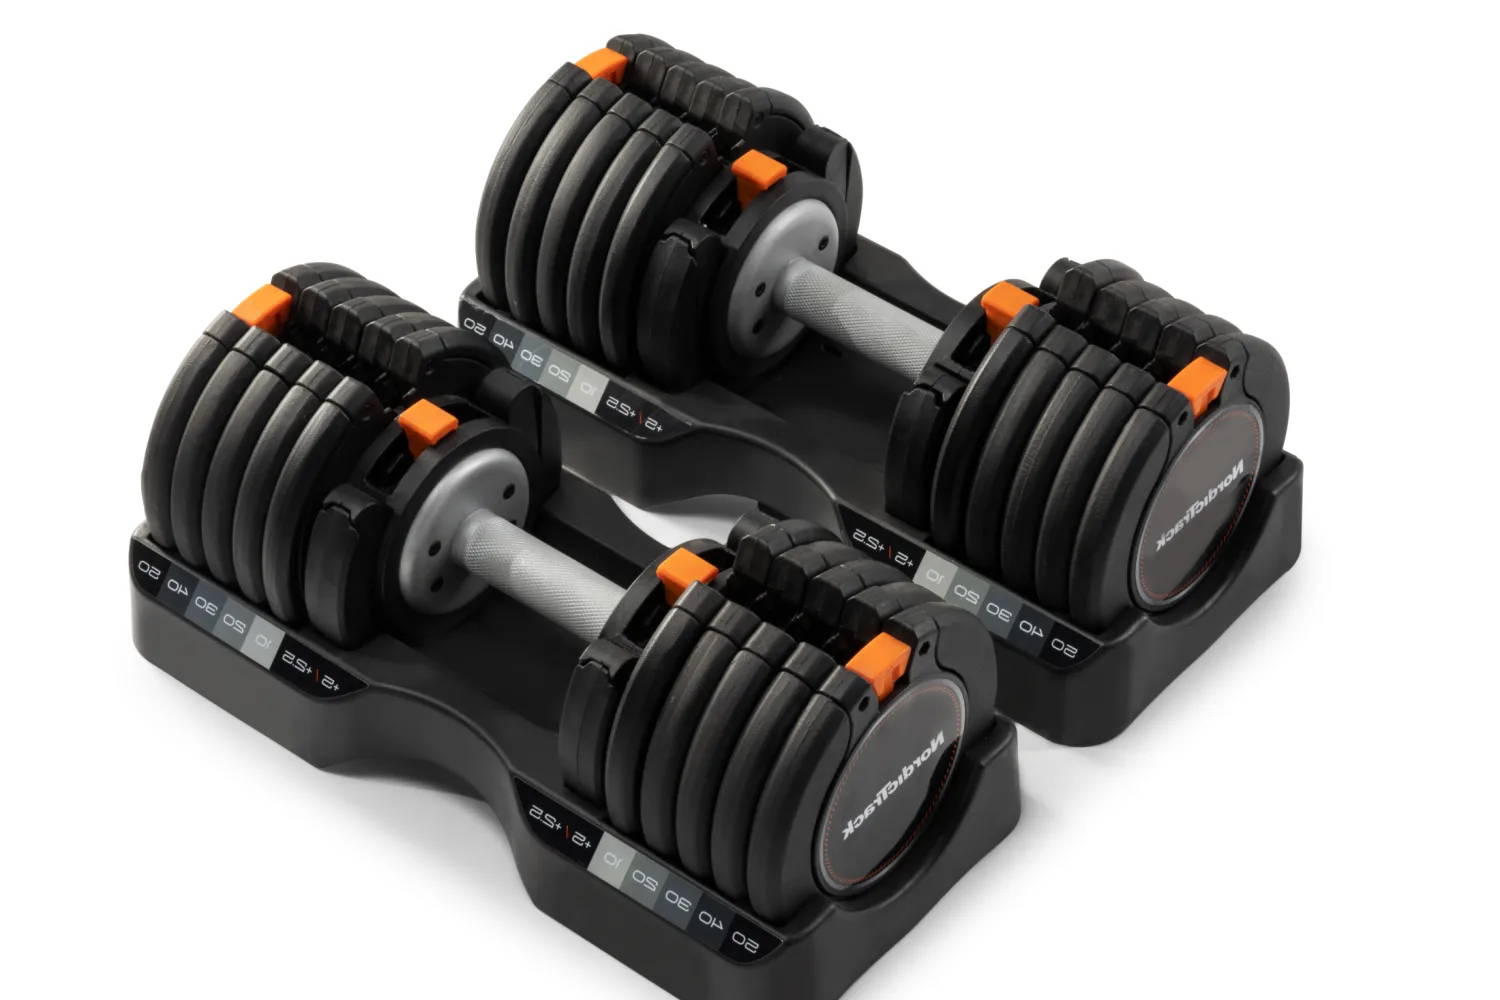 NordicTrack Select-A-Weight Adjustable Dumbbell